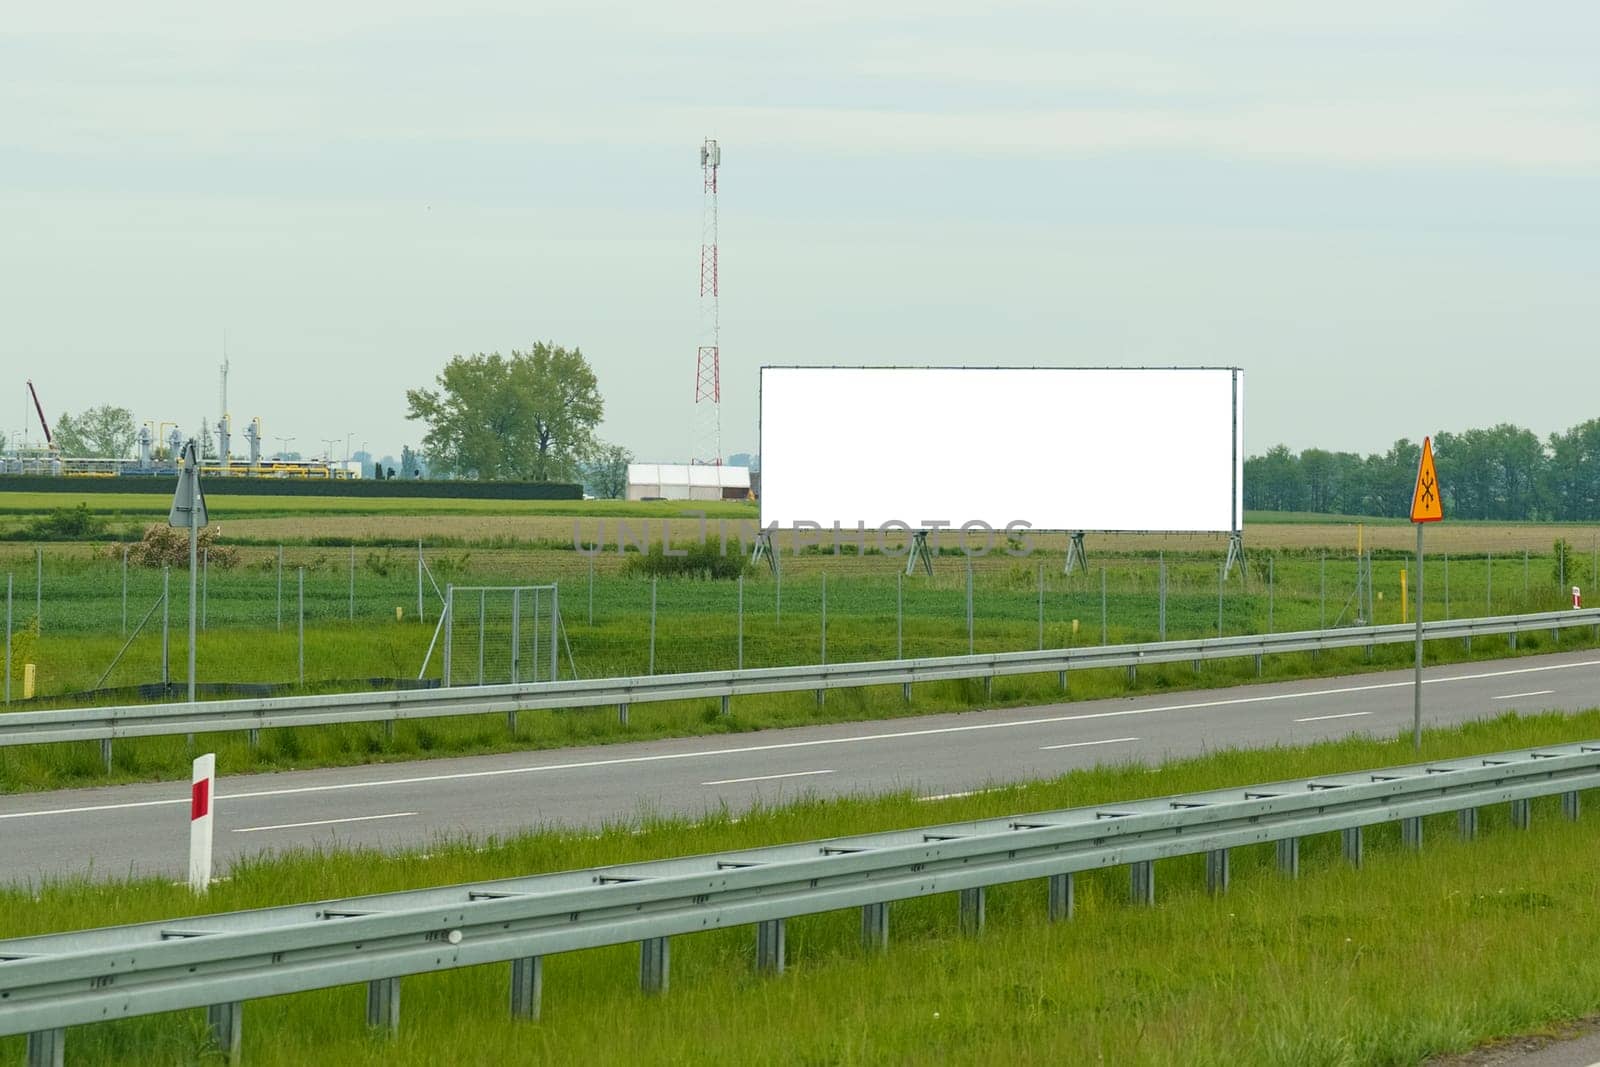 Large billboard promoting a product or service on the side of a bustling highway, attracting the attention of passing motorists.